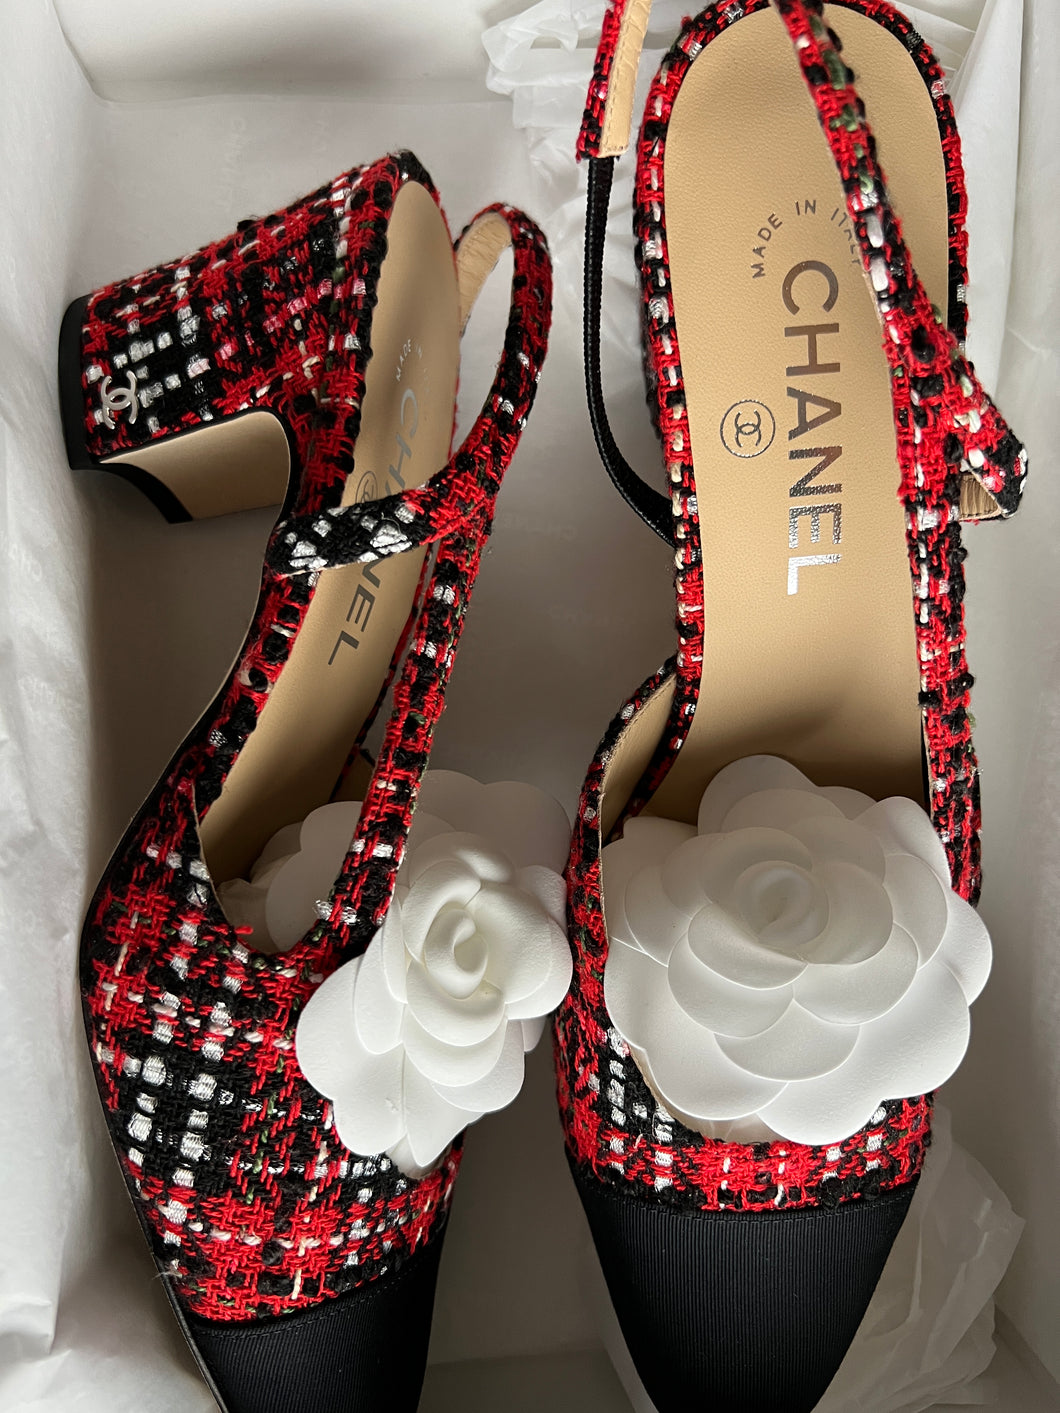 Chanel Shoes Tweed Slingbacks, Multicolor Beads, Size 40, New in